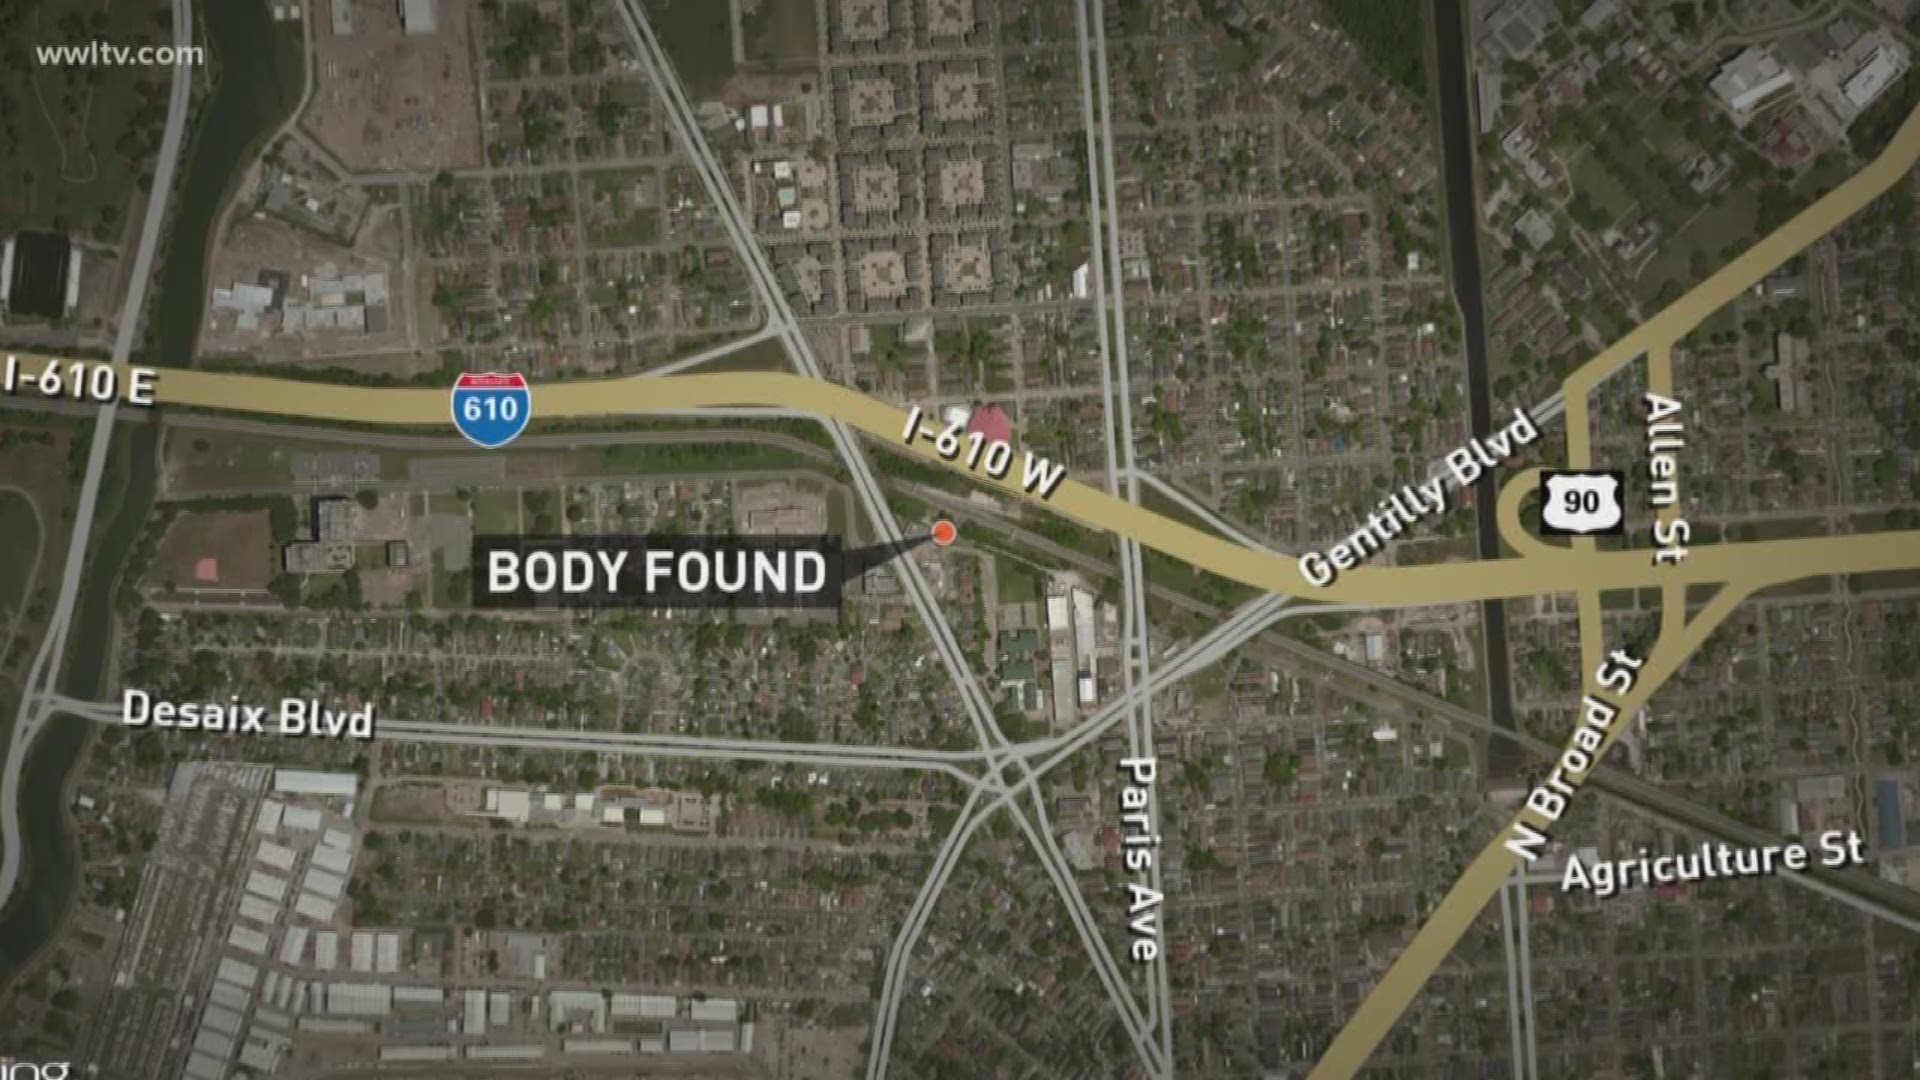 The body was found in a well about 8 feet deep in Gentilly. 